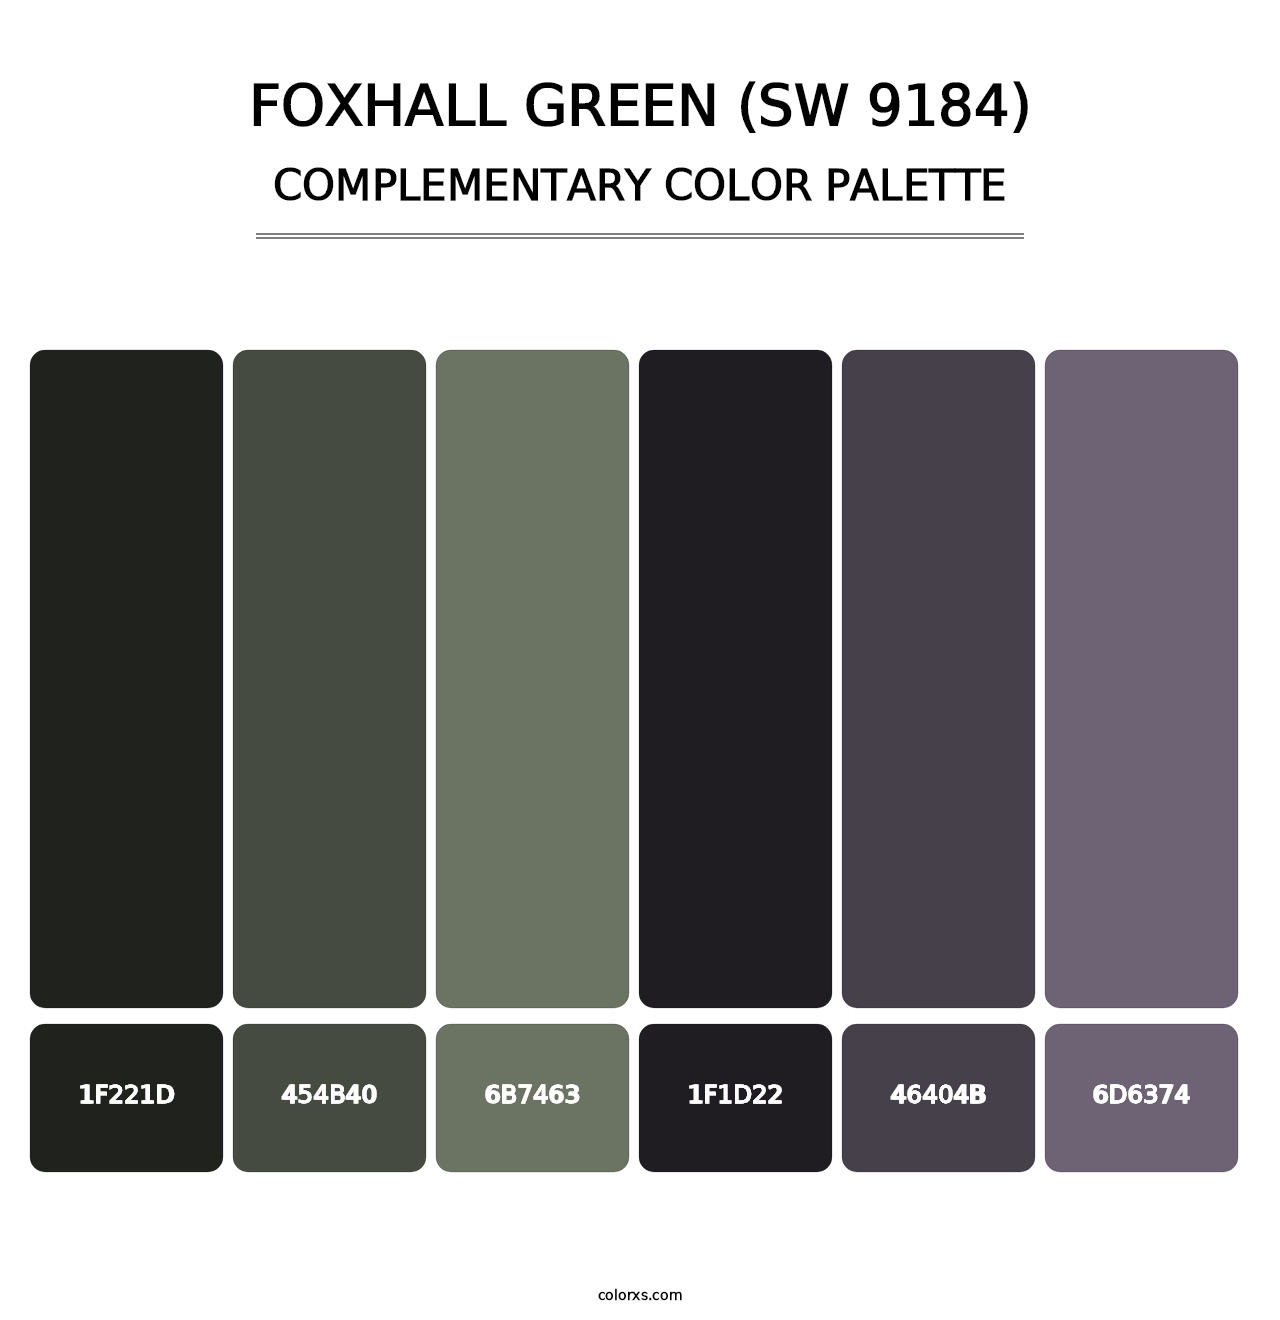 Foxhall Green (SW 9184) - Complementary Color Palette